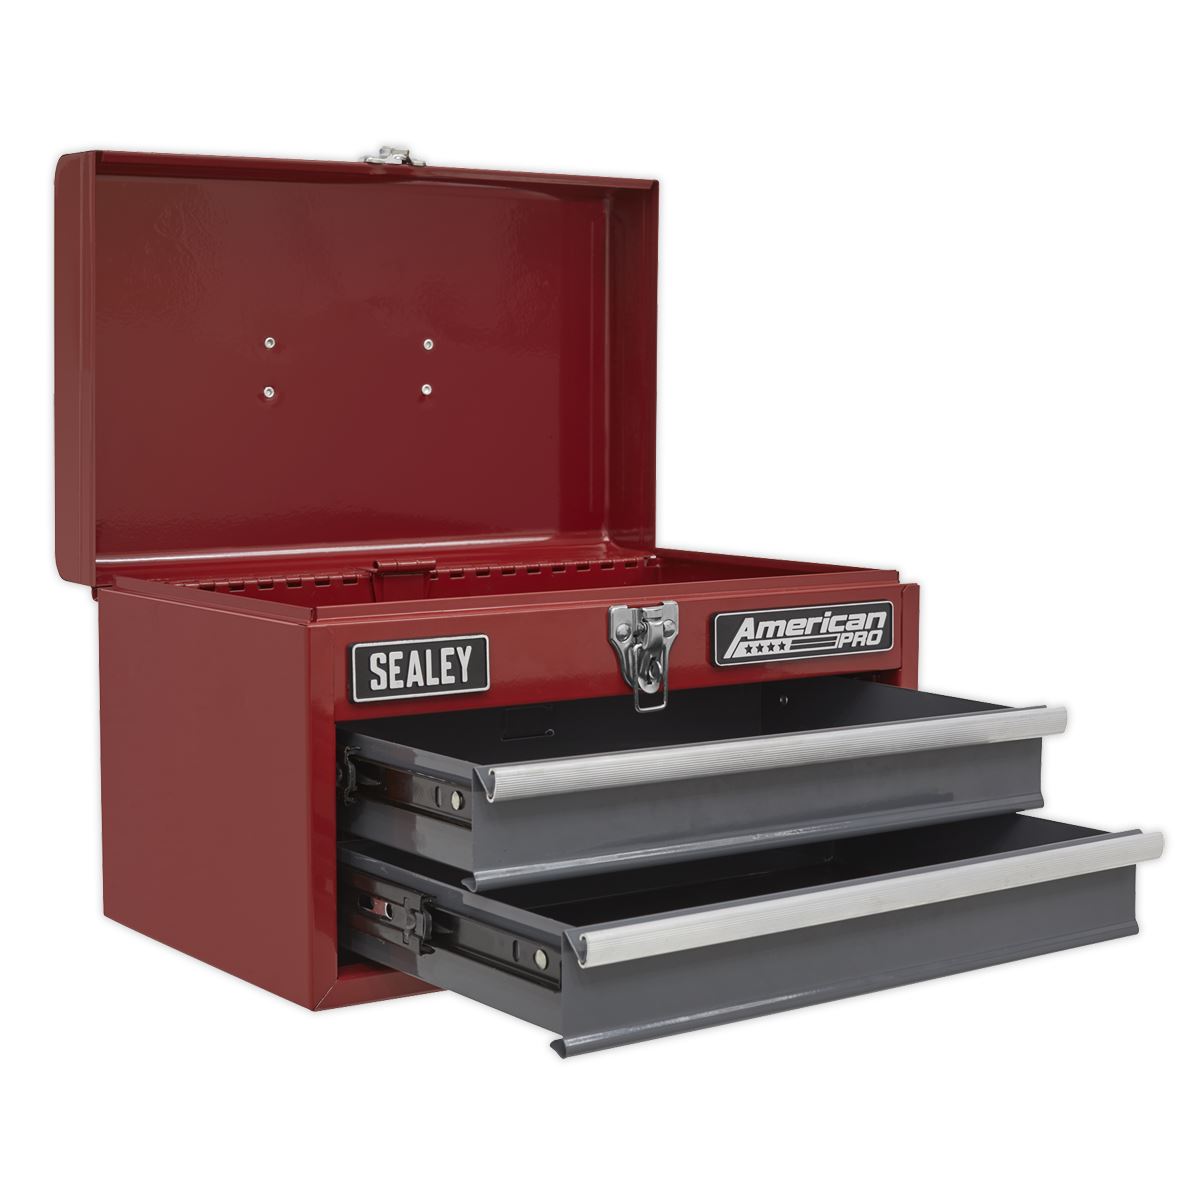 Sealey American Pro Toolbox 2 Drawer with Ball-Bearing Slides